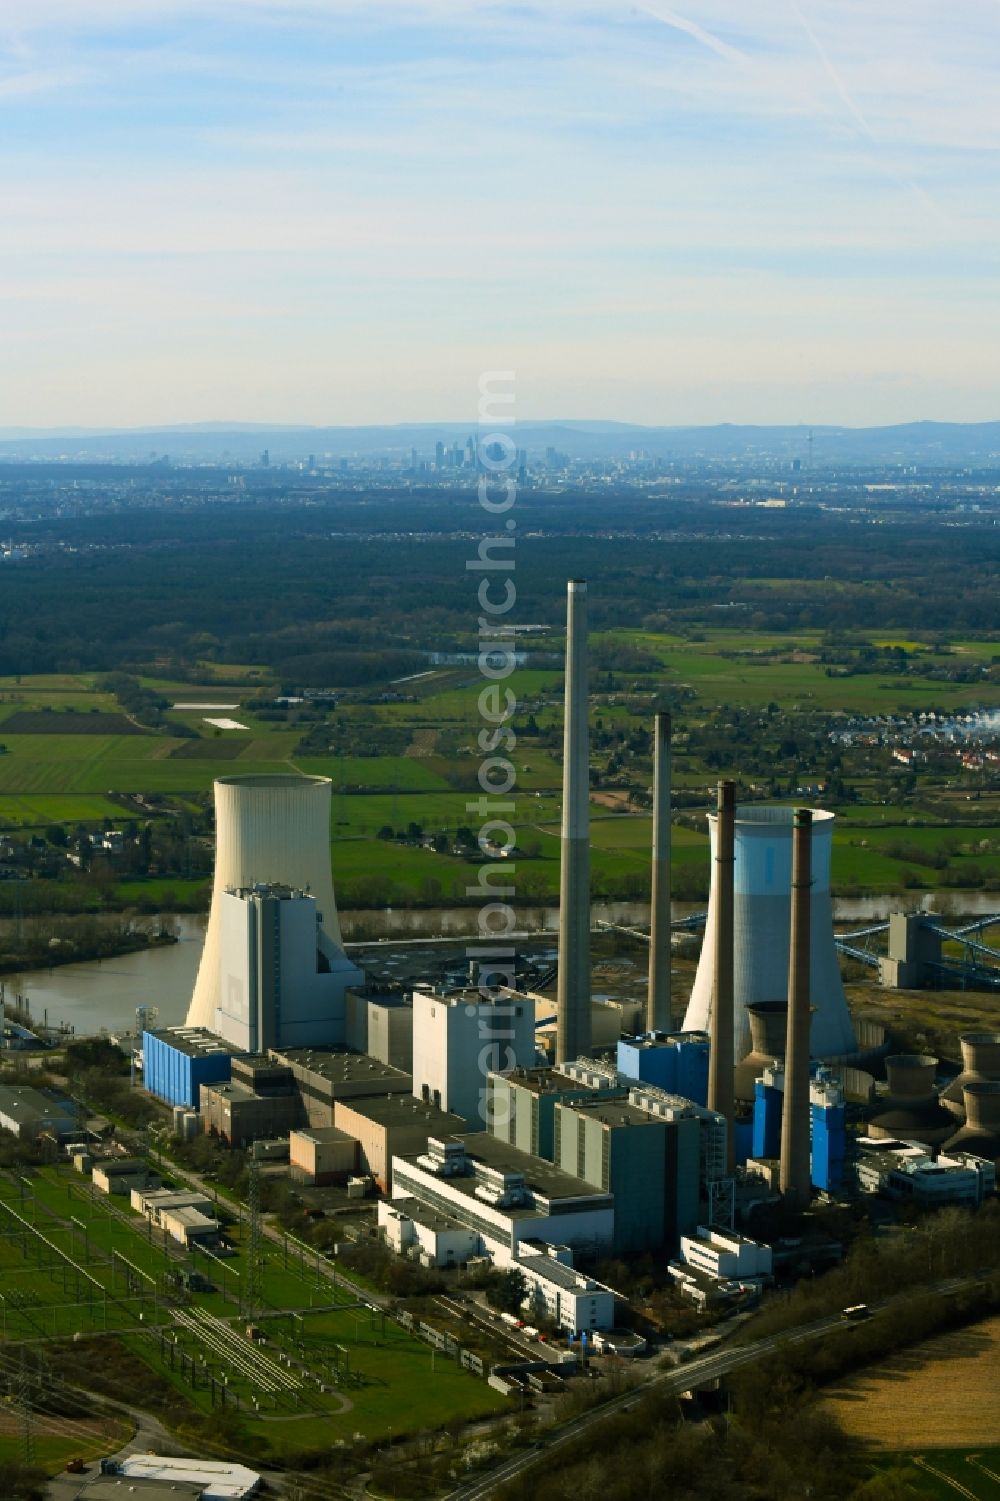 Großkrotzenburg from above - Power plants and exhaust towers of coal thermal power station Staudinger in Grosskrotzenburg in the state Hesse, Germany